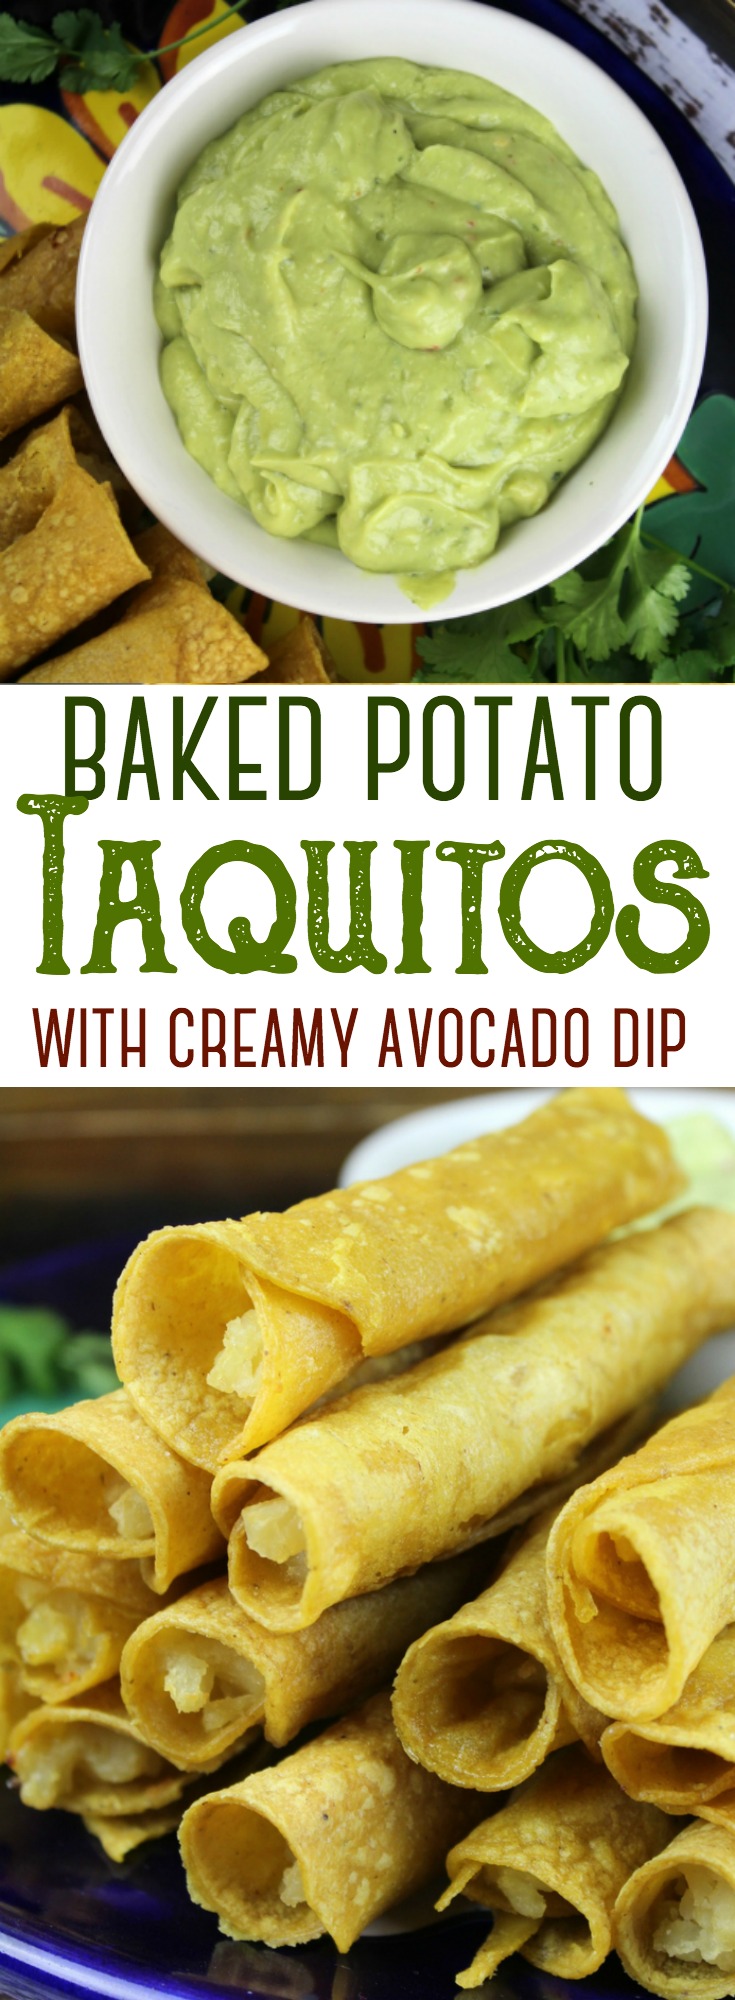 These baked potato taquitos are a wonderful meatless meal opportunity - easy to put together and delicious with creamy avocado dip!   #potatoes #meatless #avocado #taquitos #vegetarian #vegan #baked